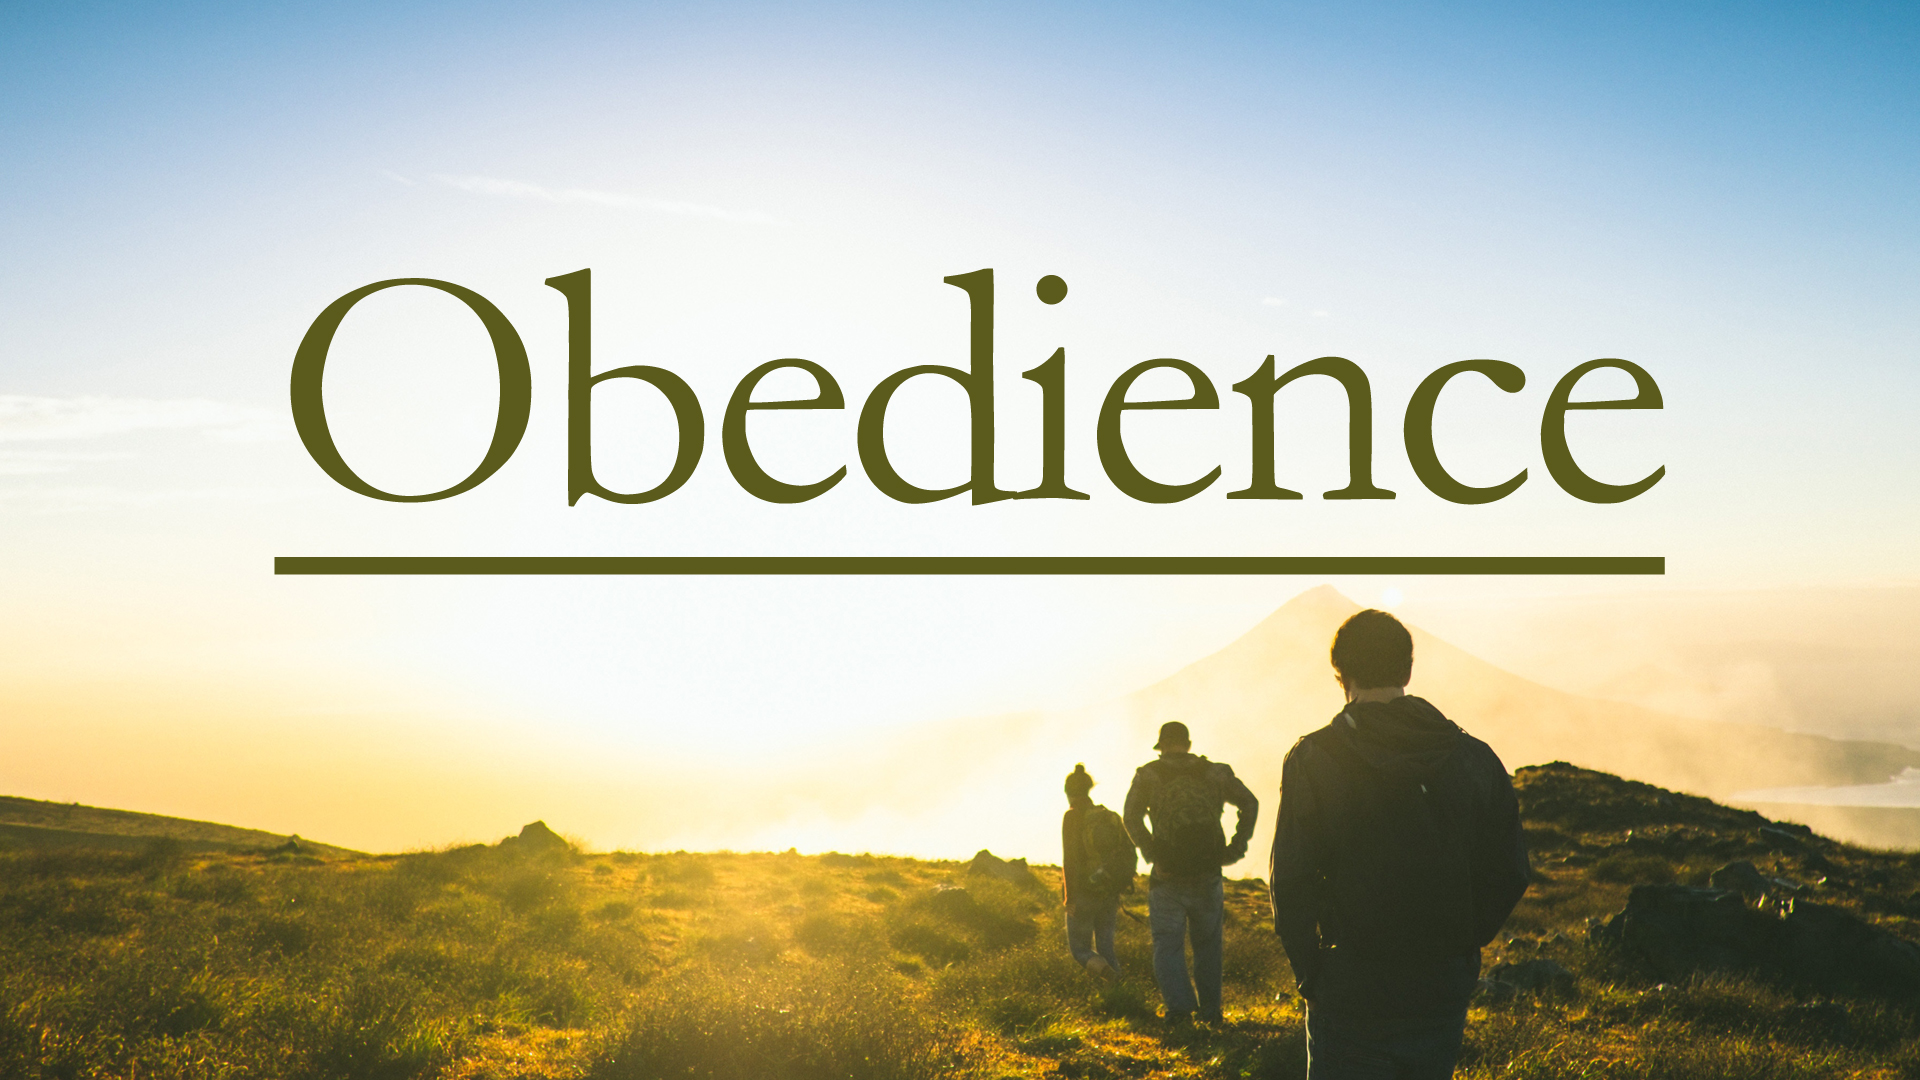 Obedience activates abundance, Devotional box, Daily Devotional, Pastor, Bible, Isaiah Wealth Ministries, Word of God, it begins with acknowledging God, prophet isaiah wealth, loving God, reverence towards God